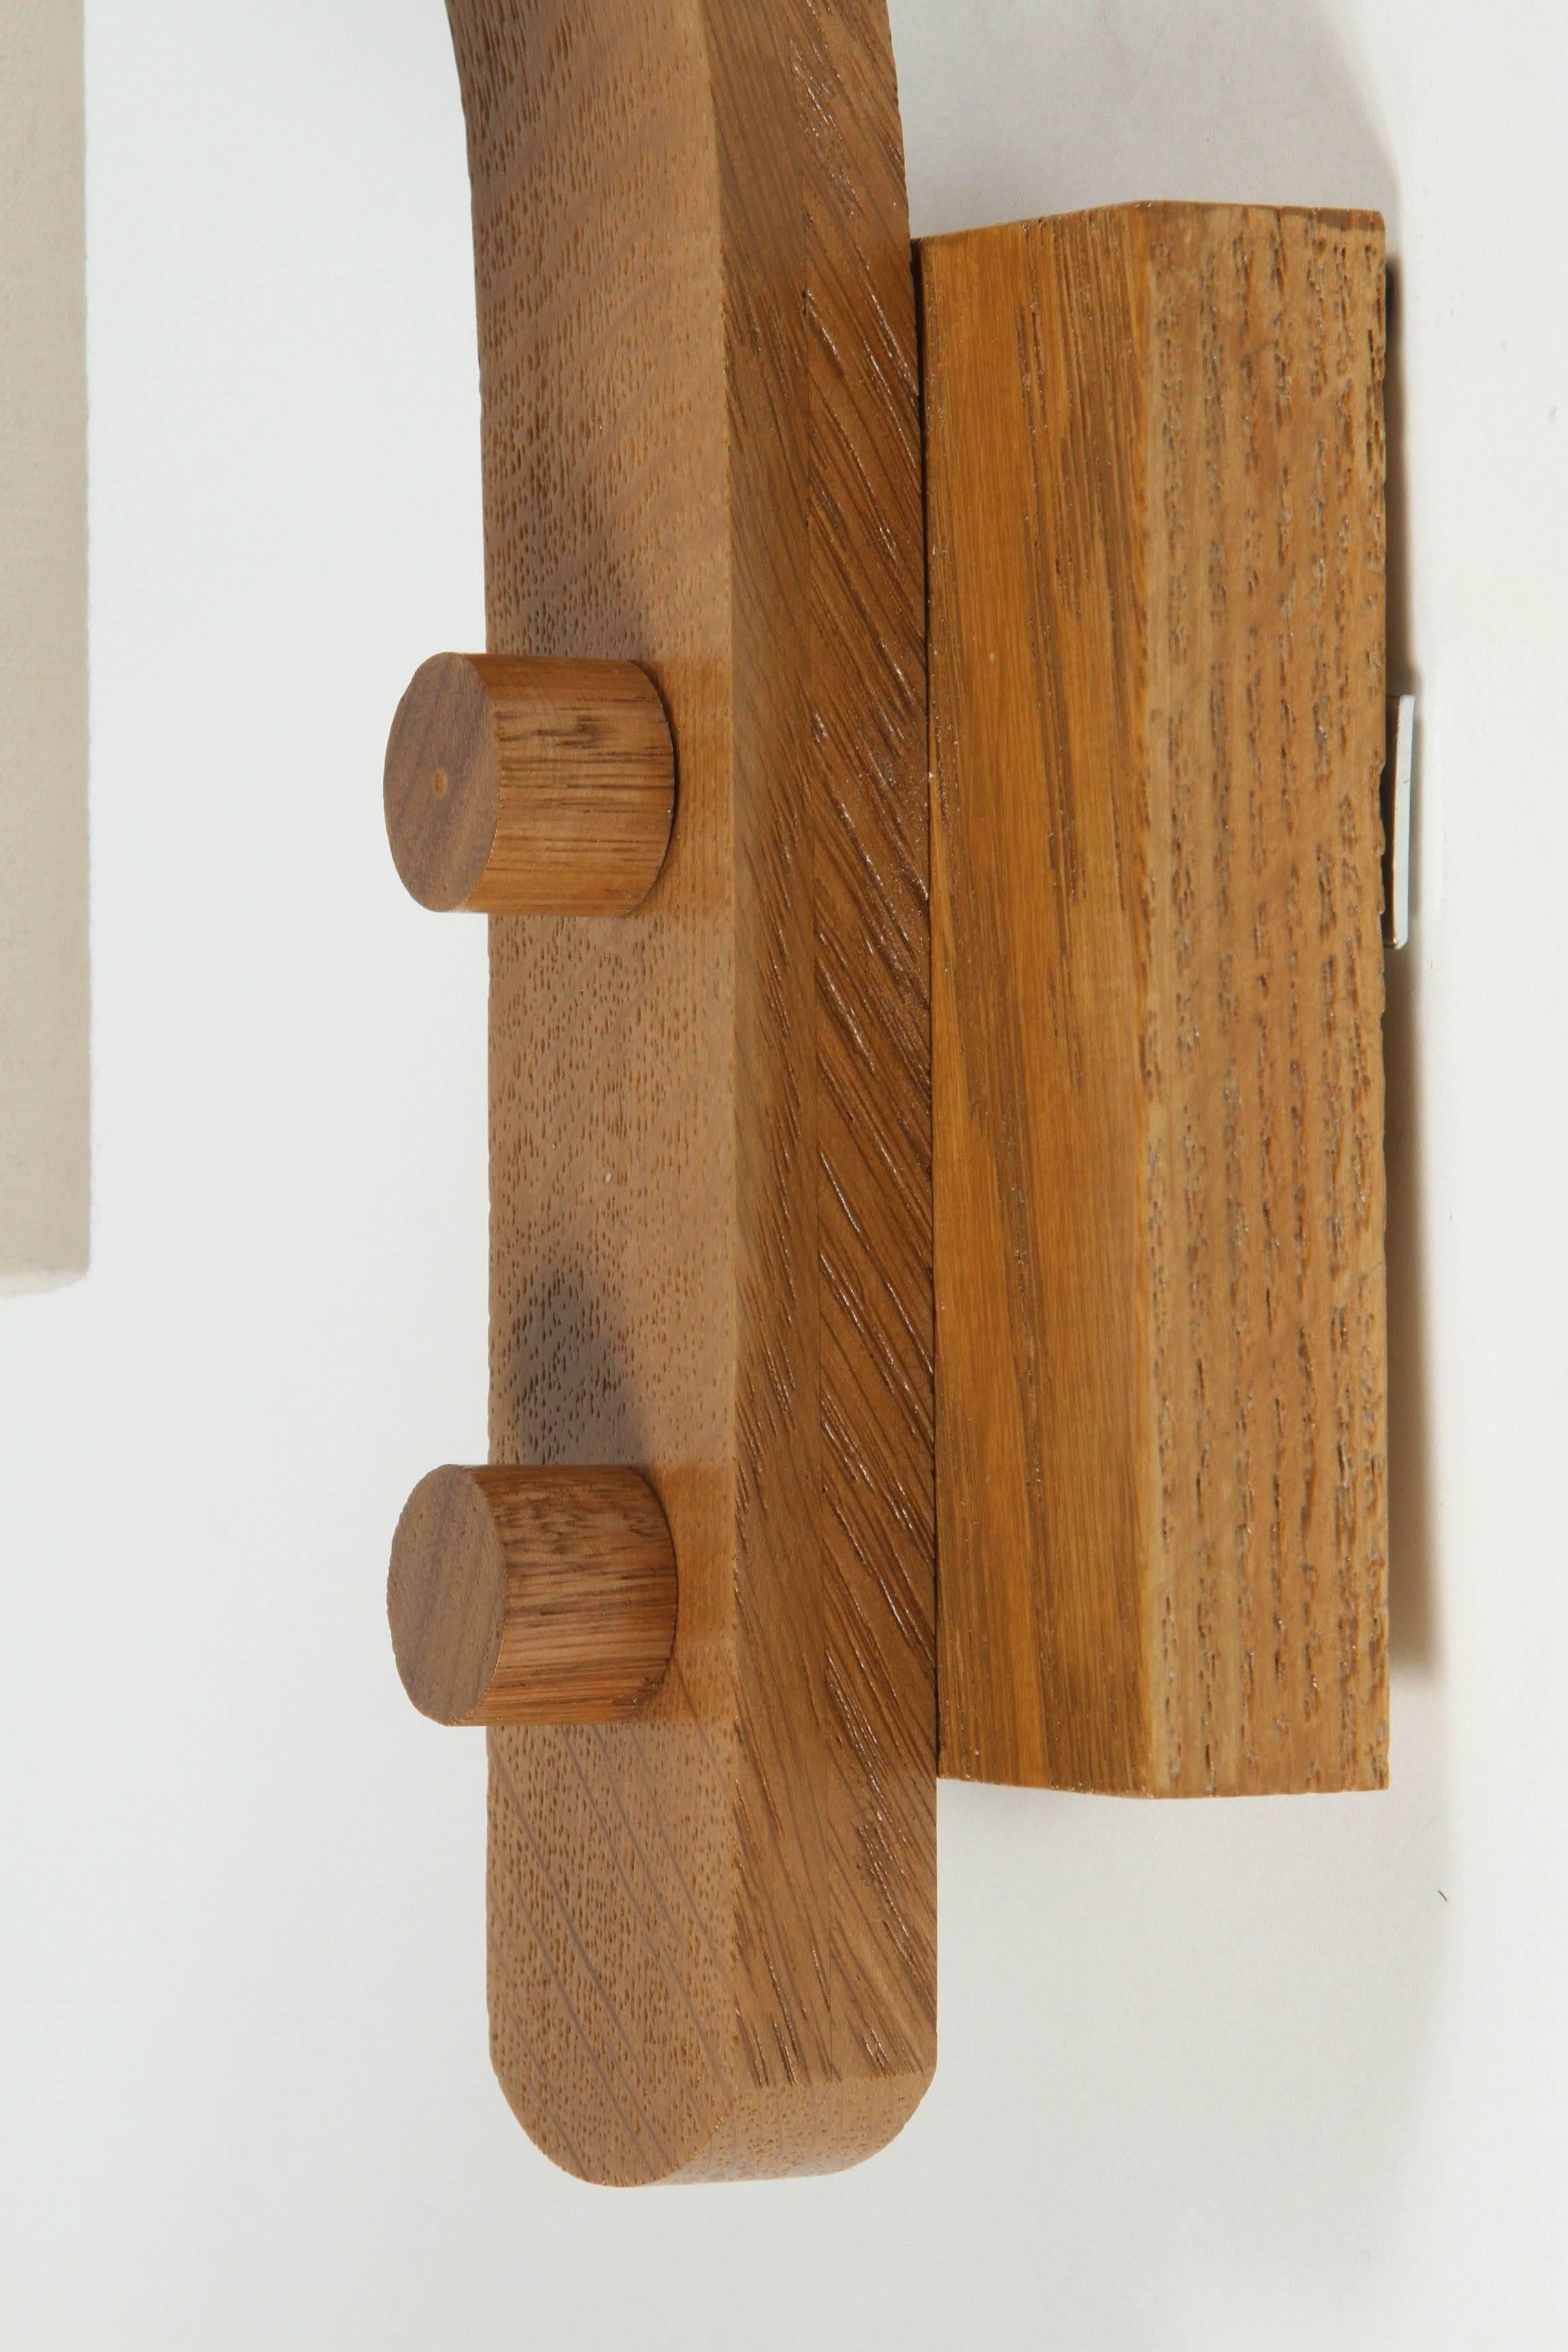 American Paul Marra Oak Sconce with Hand-Stitched Linen Shade